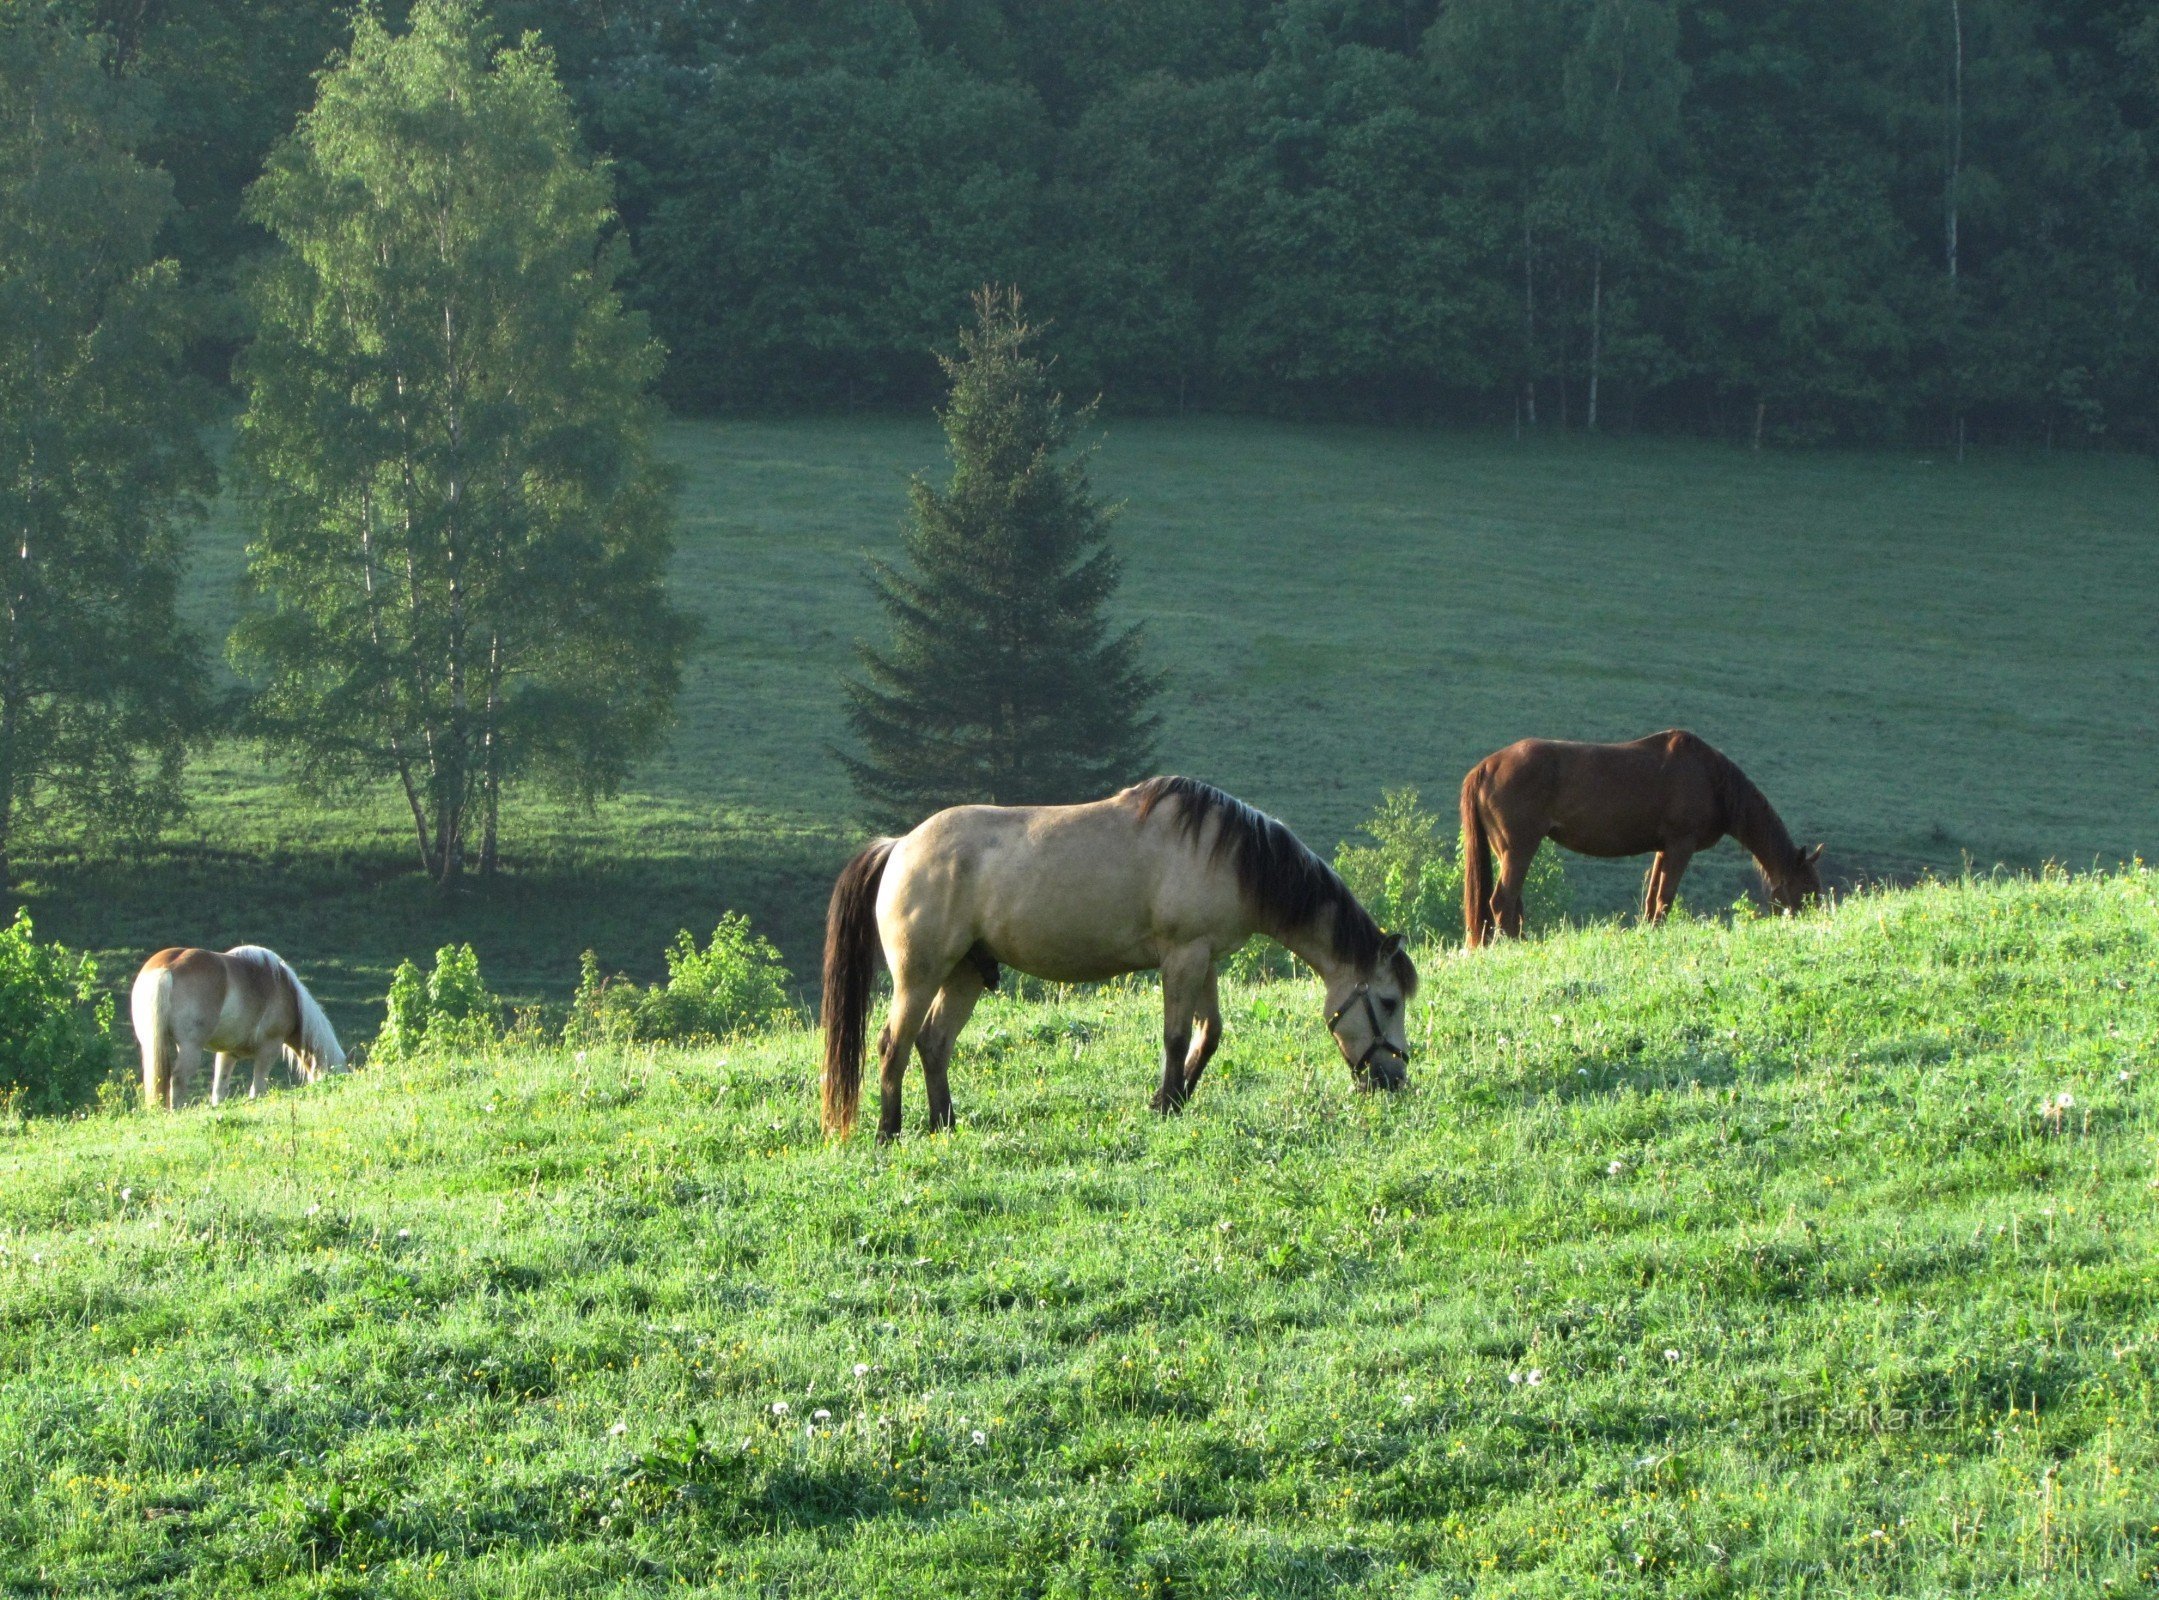 members of the Lidka stable